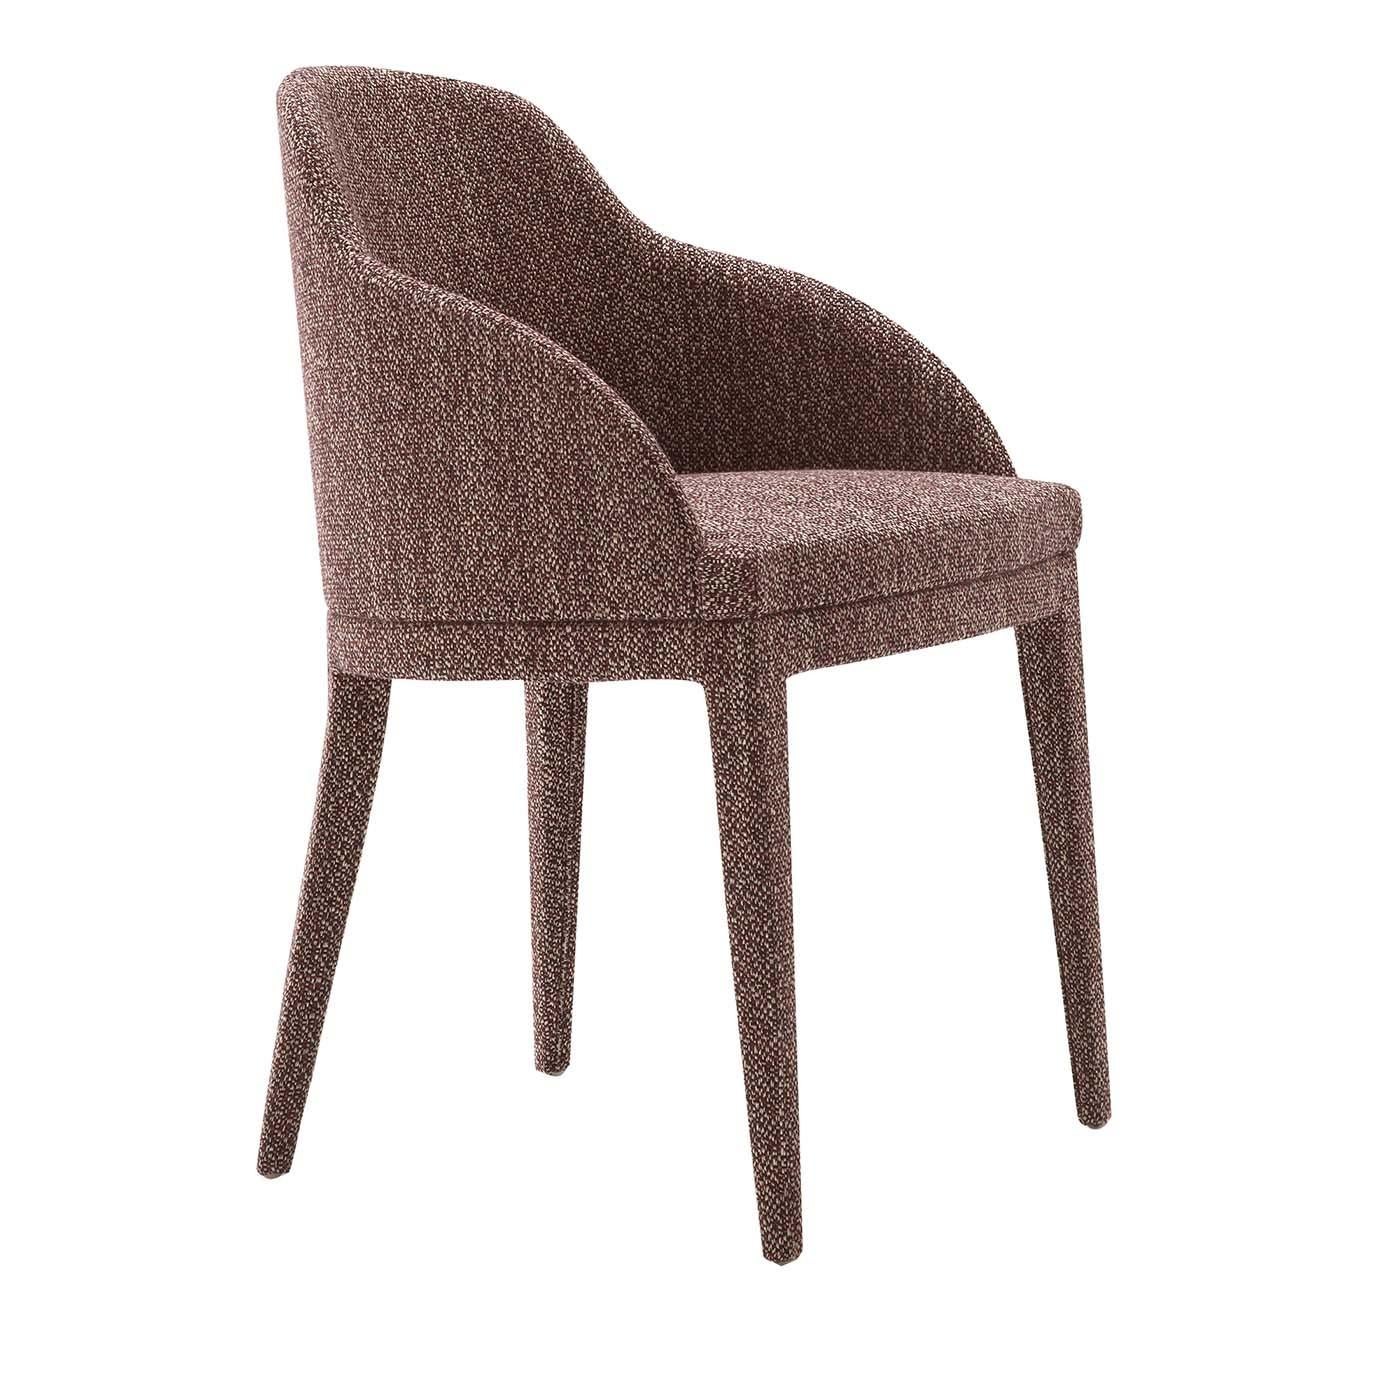 This stunning chair is a versatile piece of functional decor that can be used around a dining table, by a desk or as an accent piece in an entryway and living room. The structure of this elegant and timeless object is a square in beechwood and